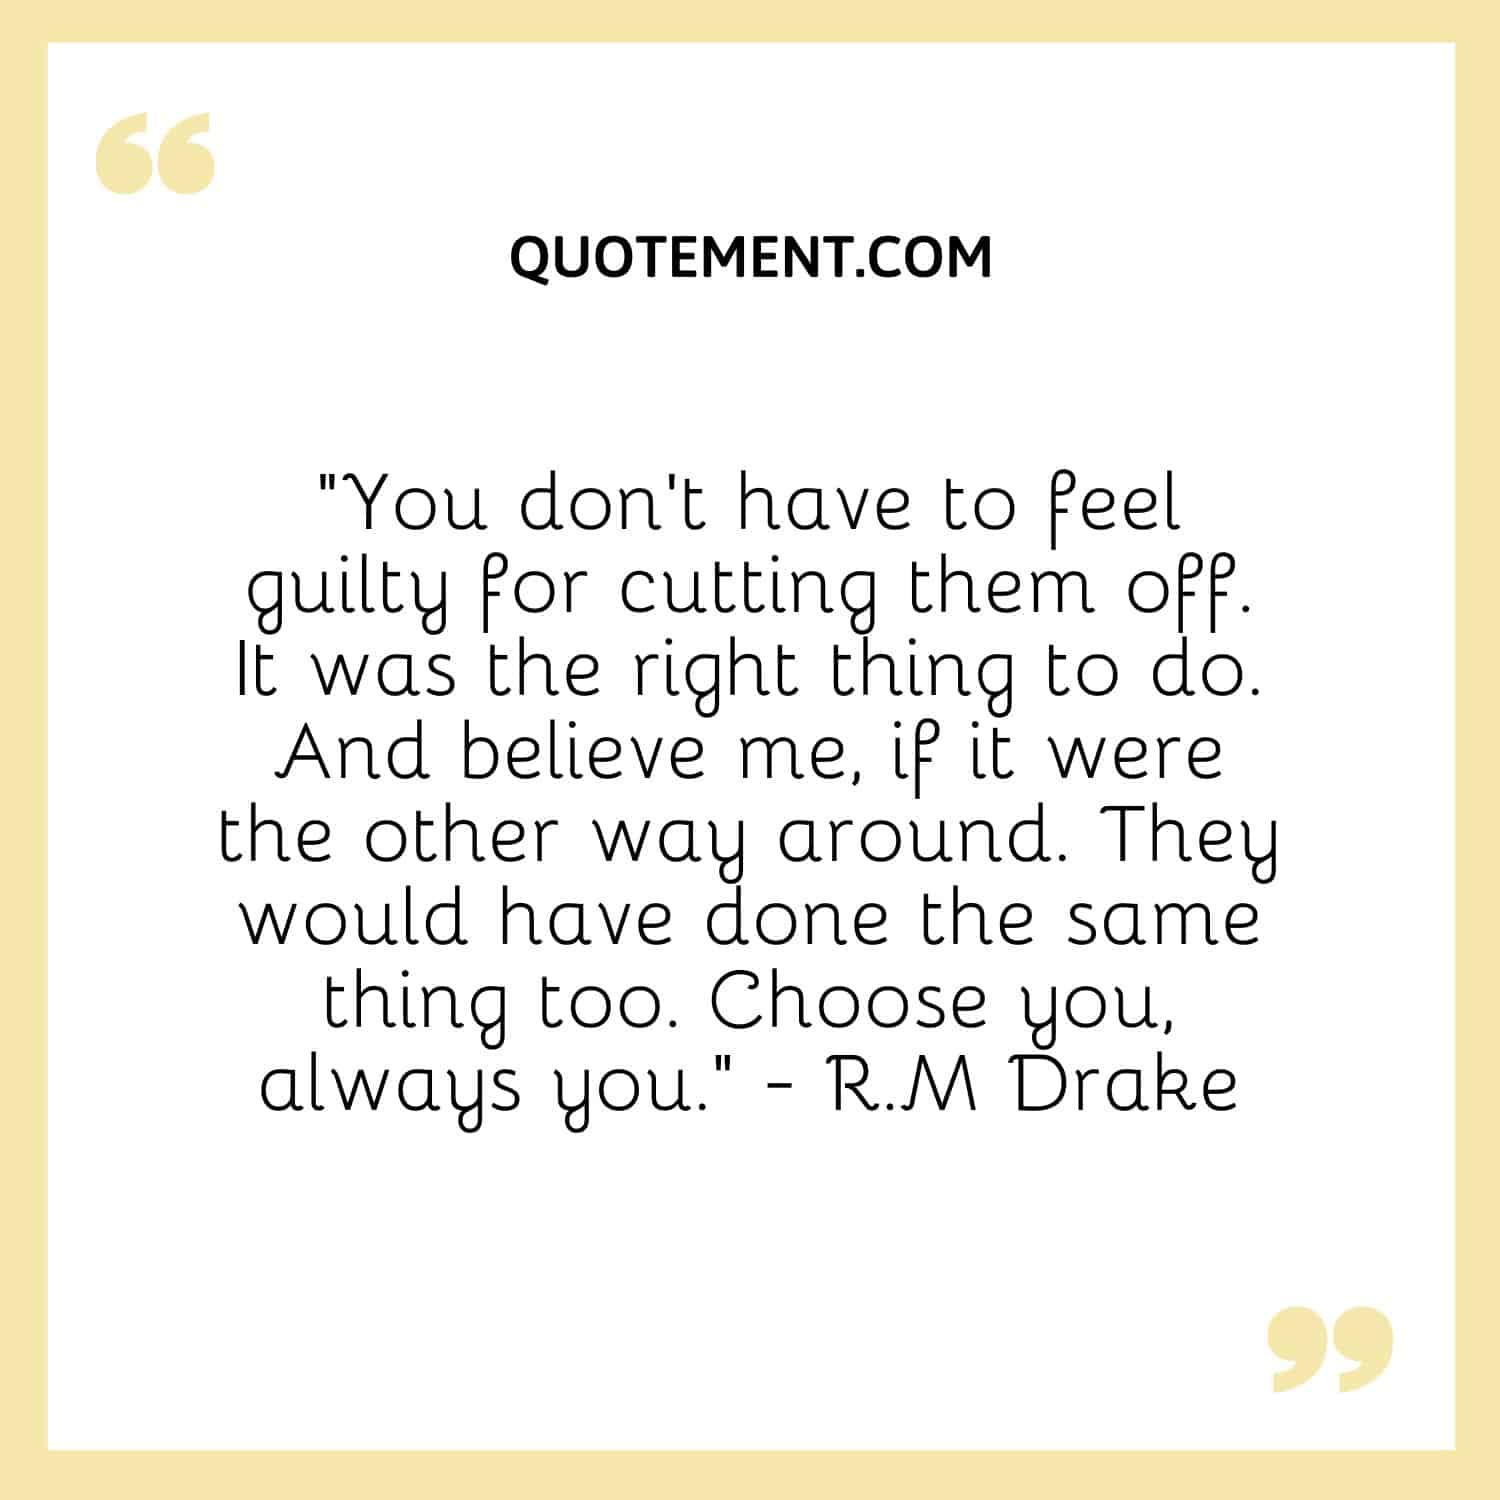 “You don't have to feel guilty for cutting them off. It was the right thing to do. And believe me, if it were the other way around. They would have done the same thing too. Choose you, always you.” - R.M Drake